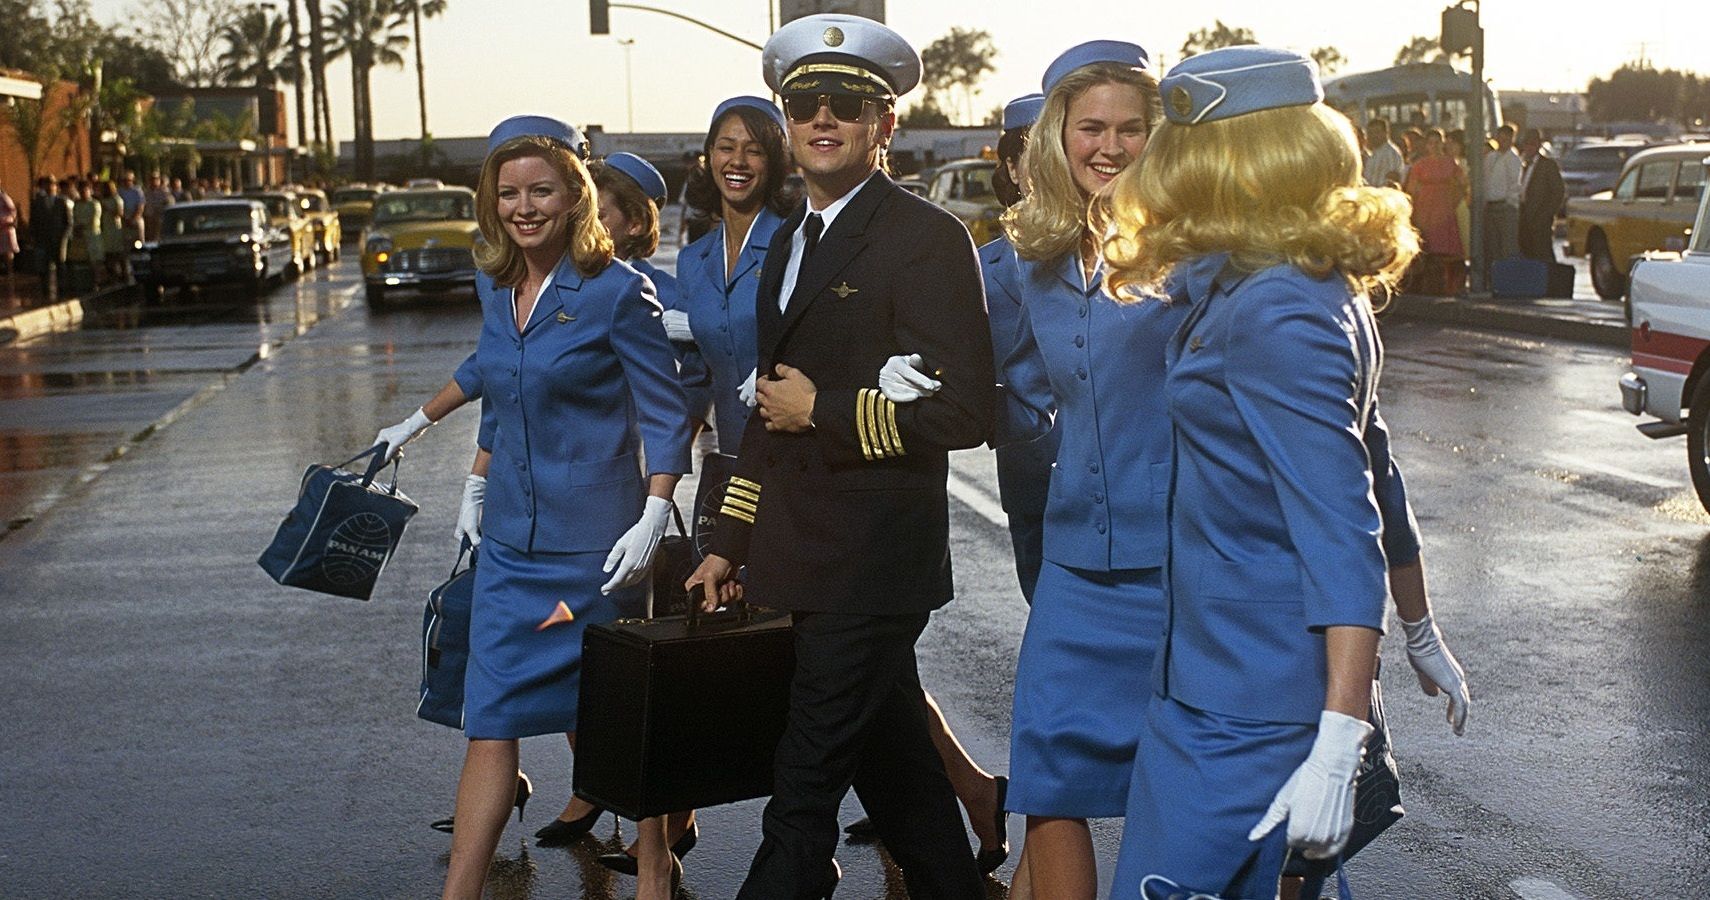 Catch Me If You Can: 5 Things Based On The True Story (& 5 Creative